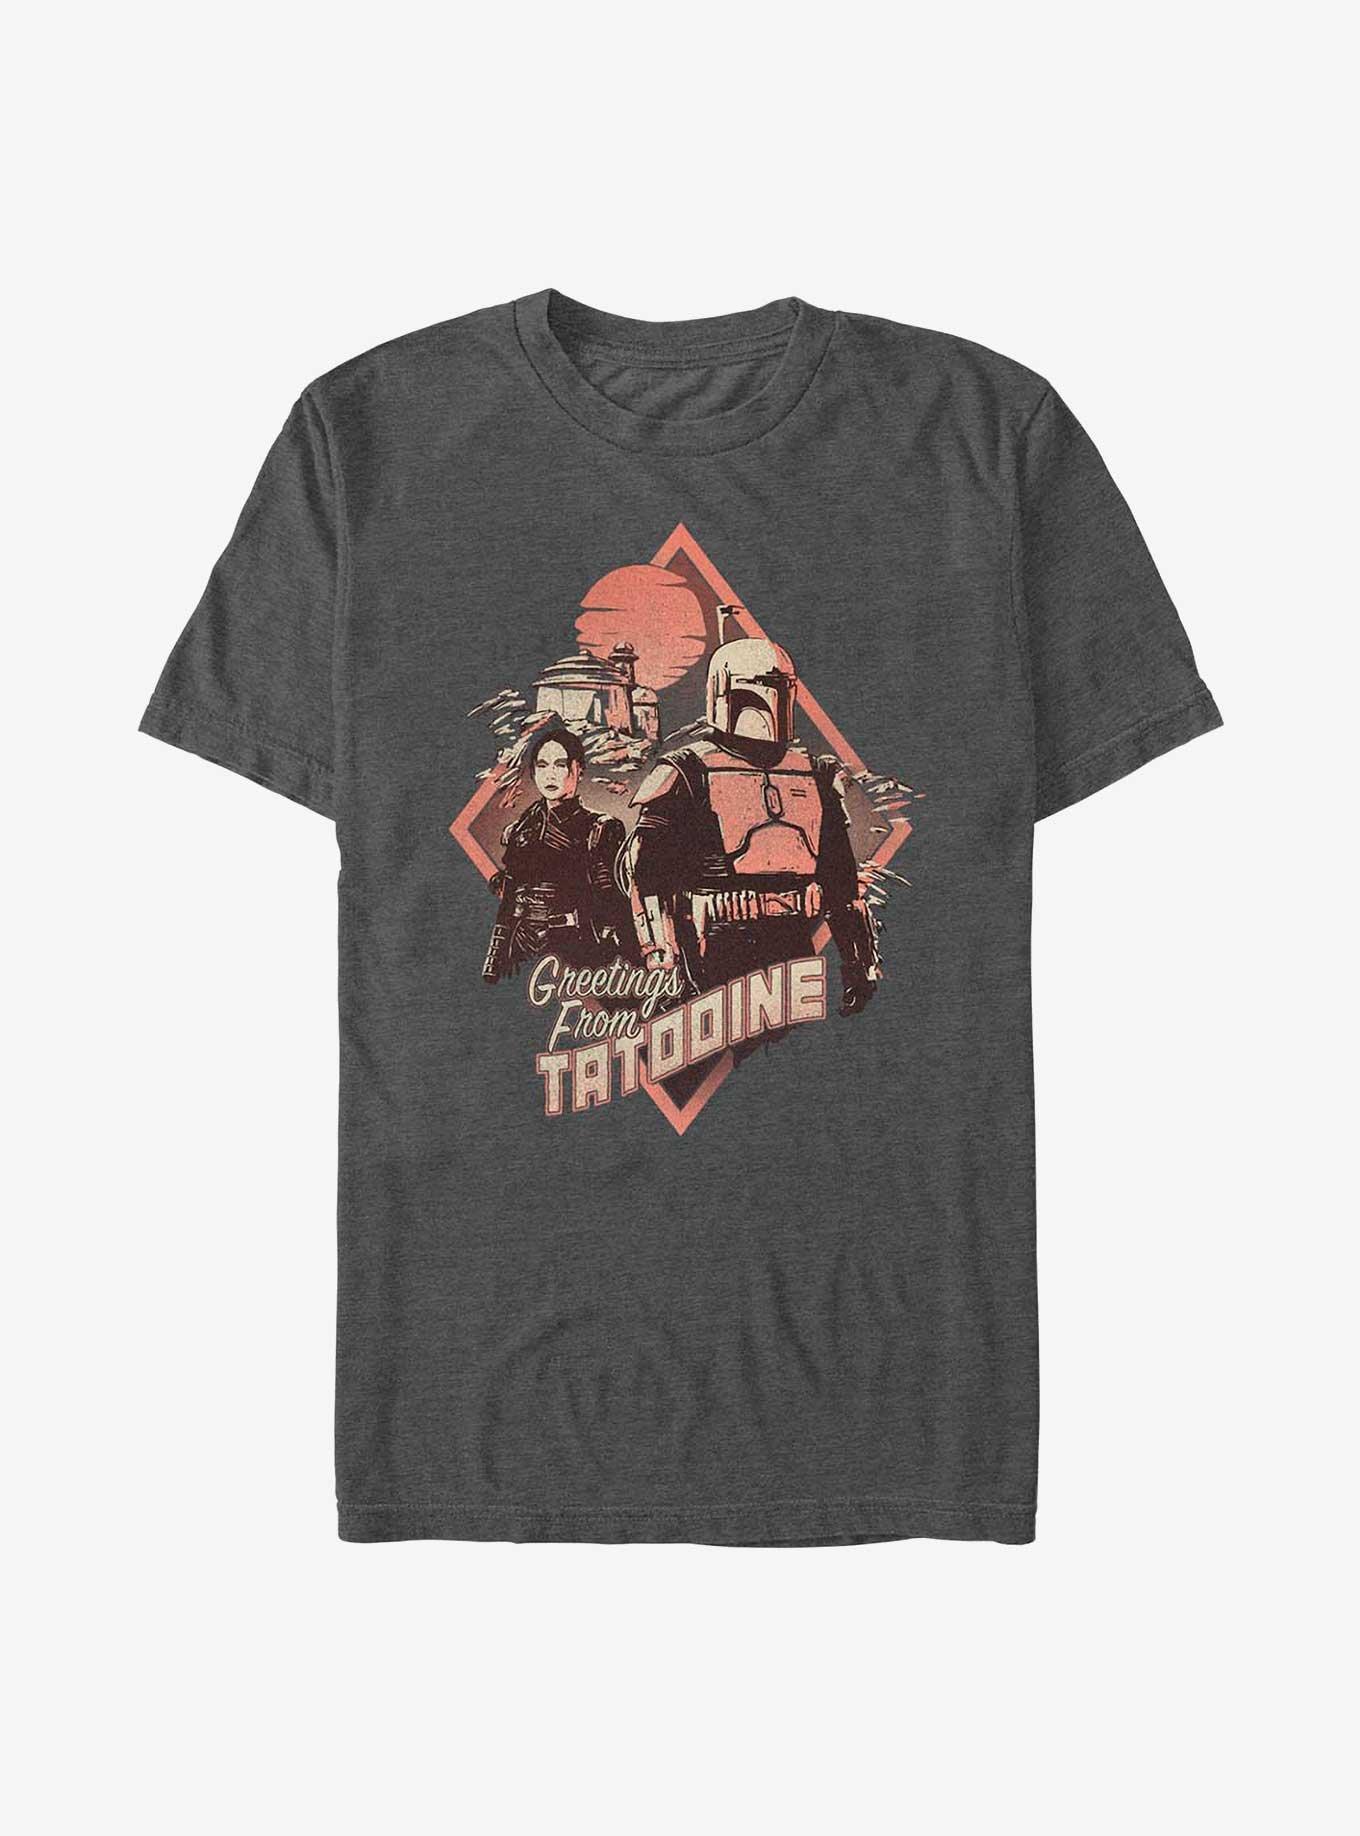 Star Wars The Book Of Boba Fett Greeting From Tatooine T-Shirt, CHAR HTR, hi-res